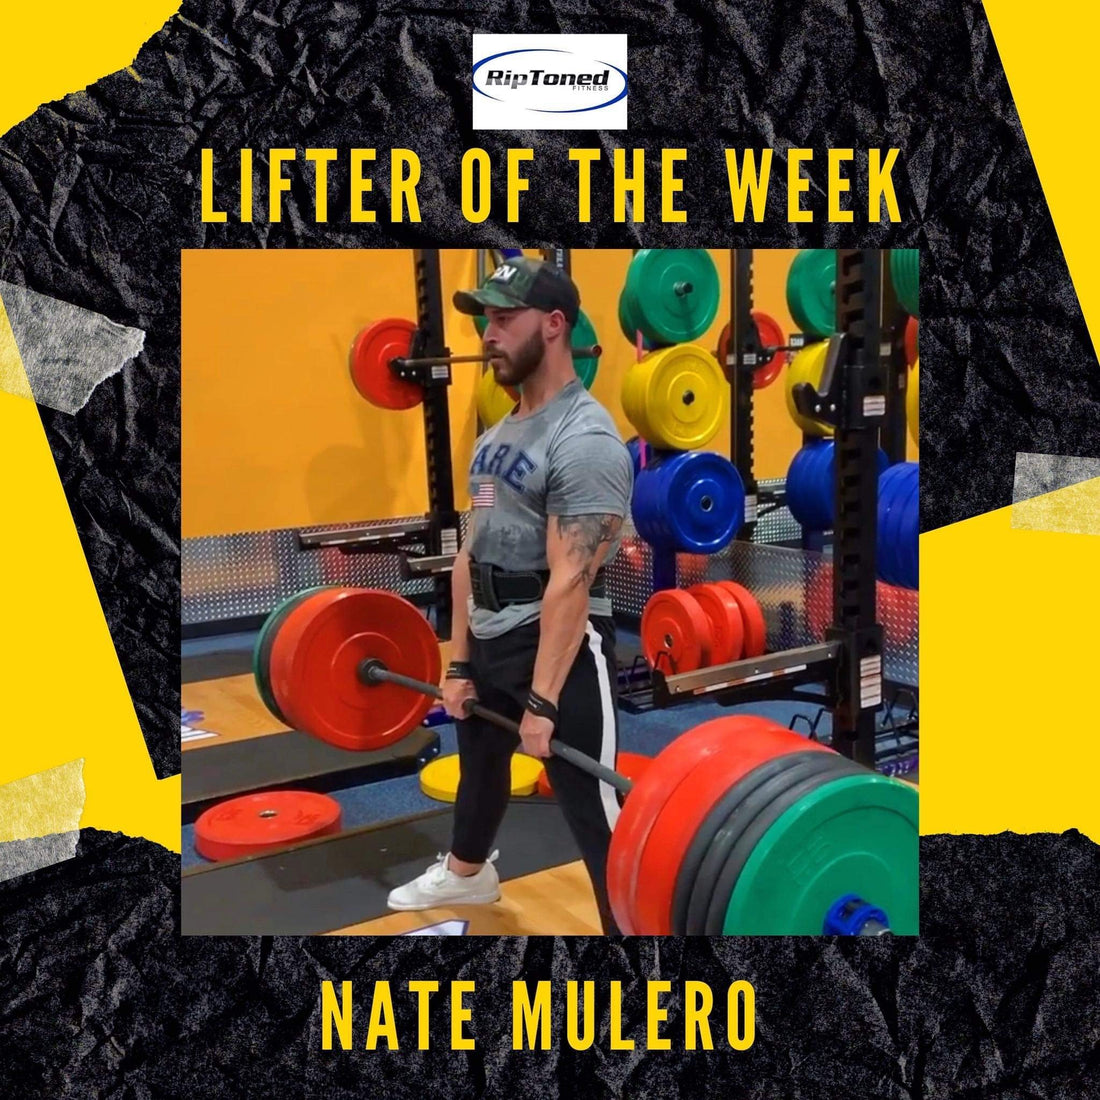 Lifter of the Week - Nate Mulero - Rip Toned